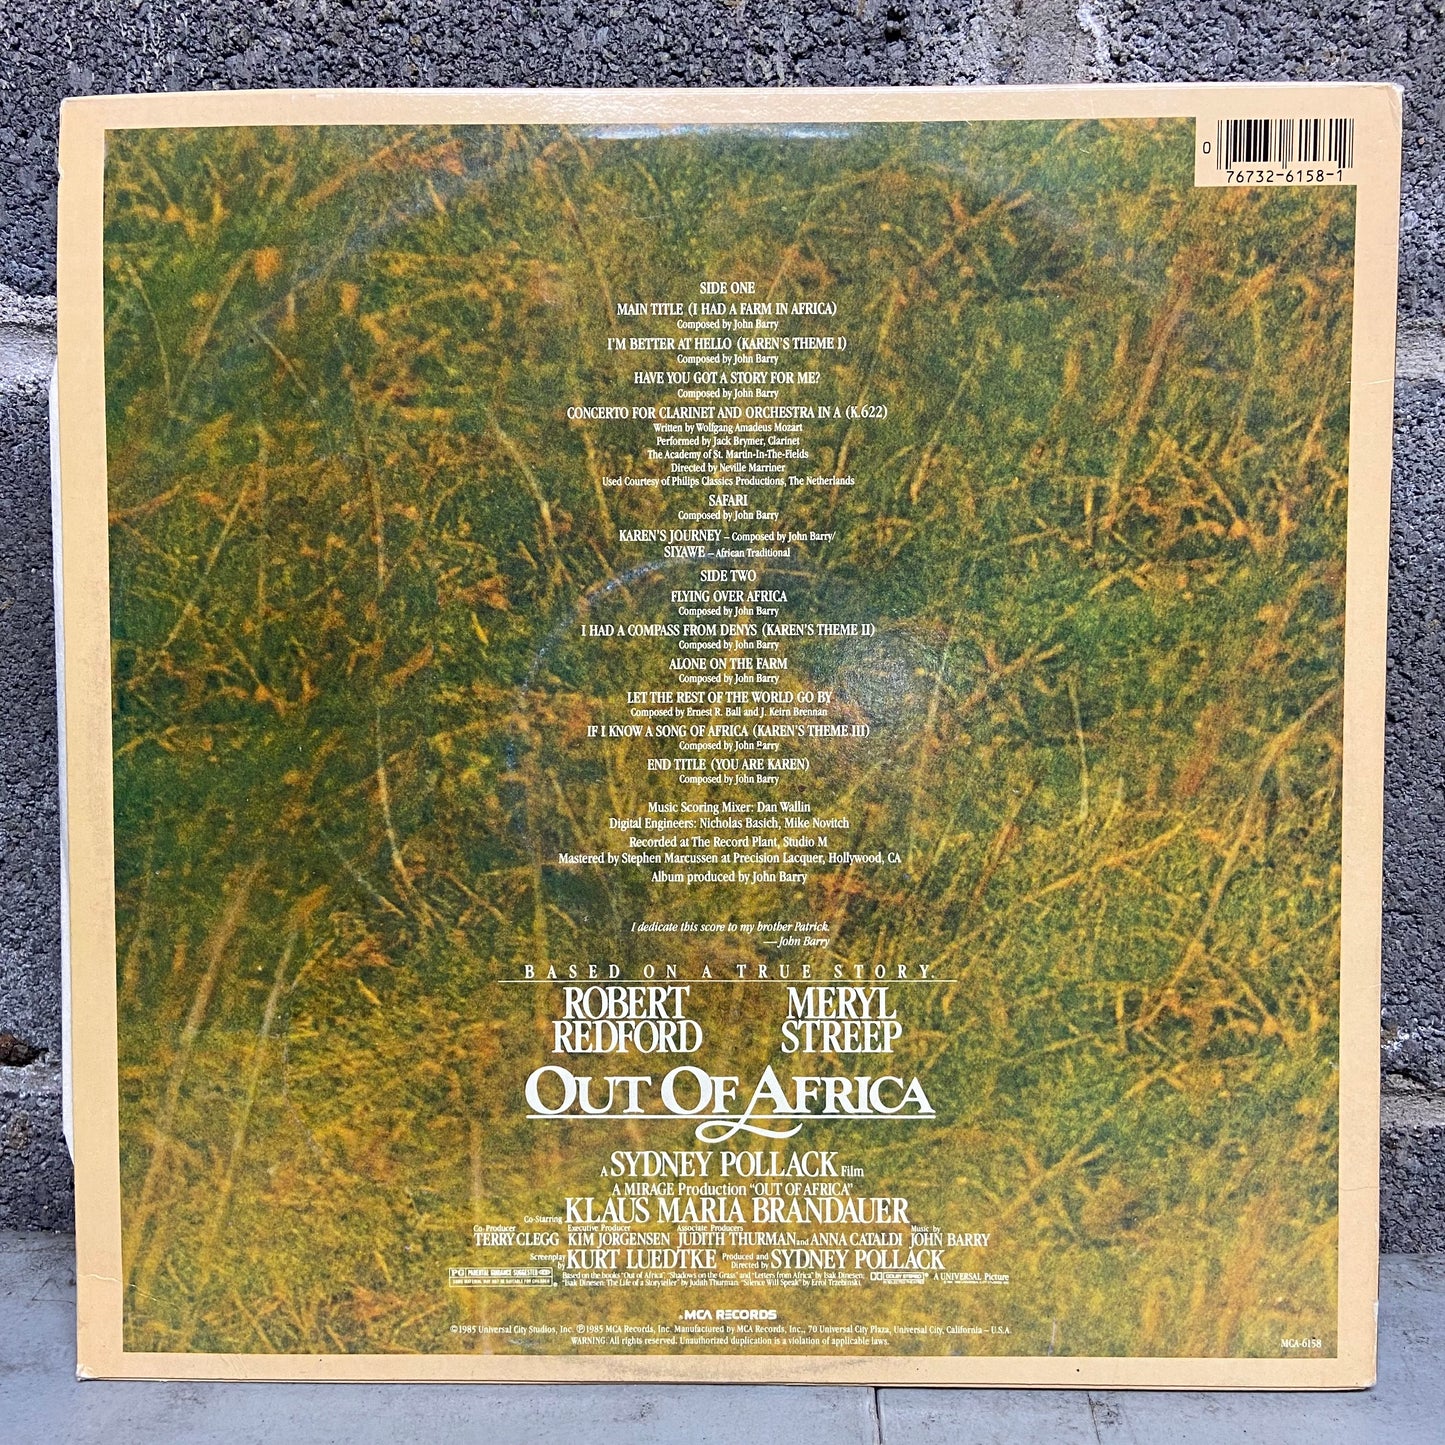 Out of Africa Soundtrack